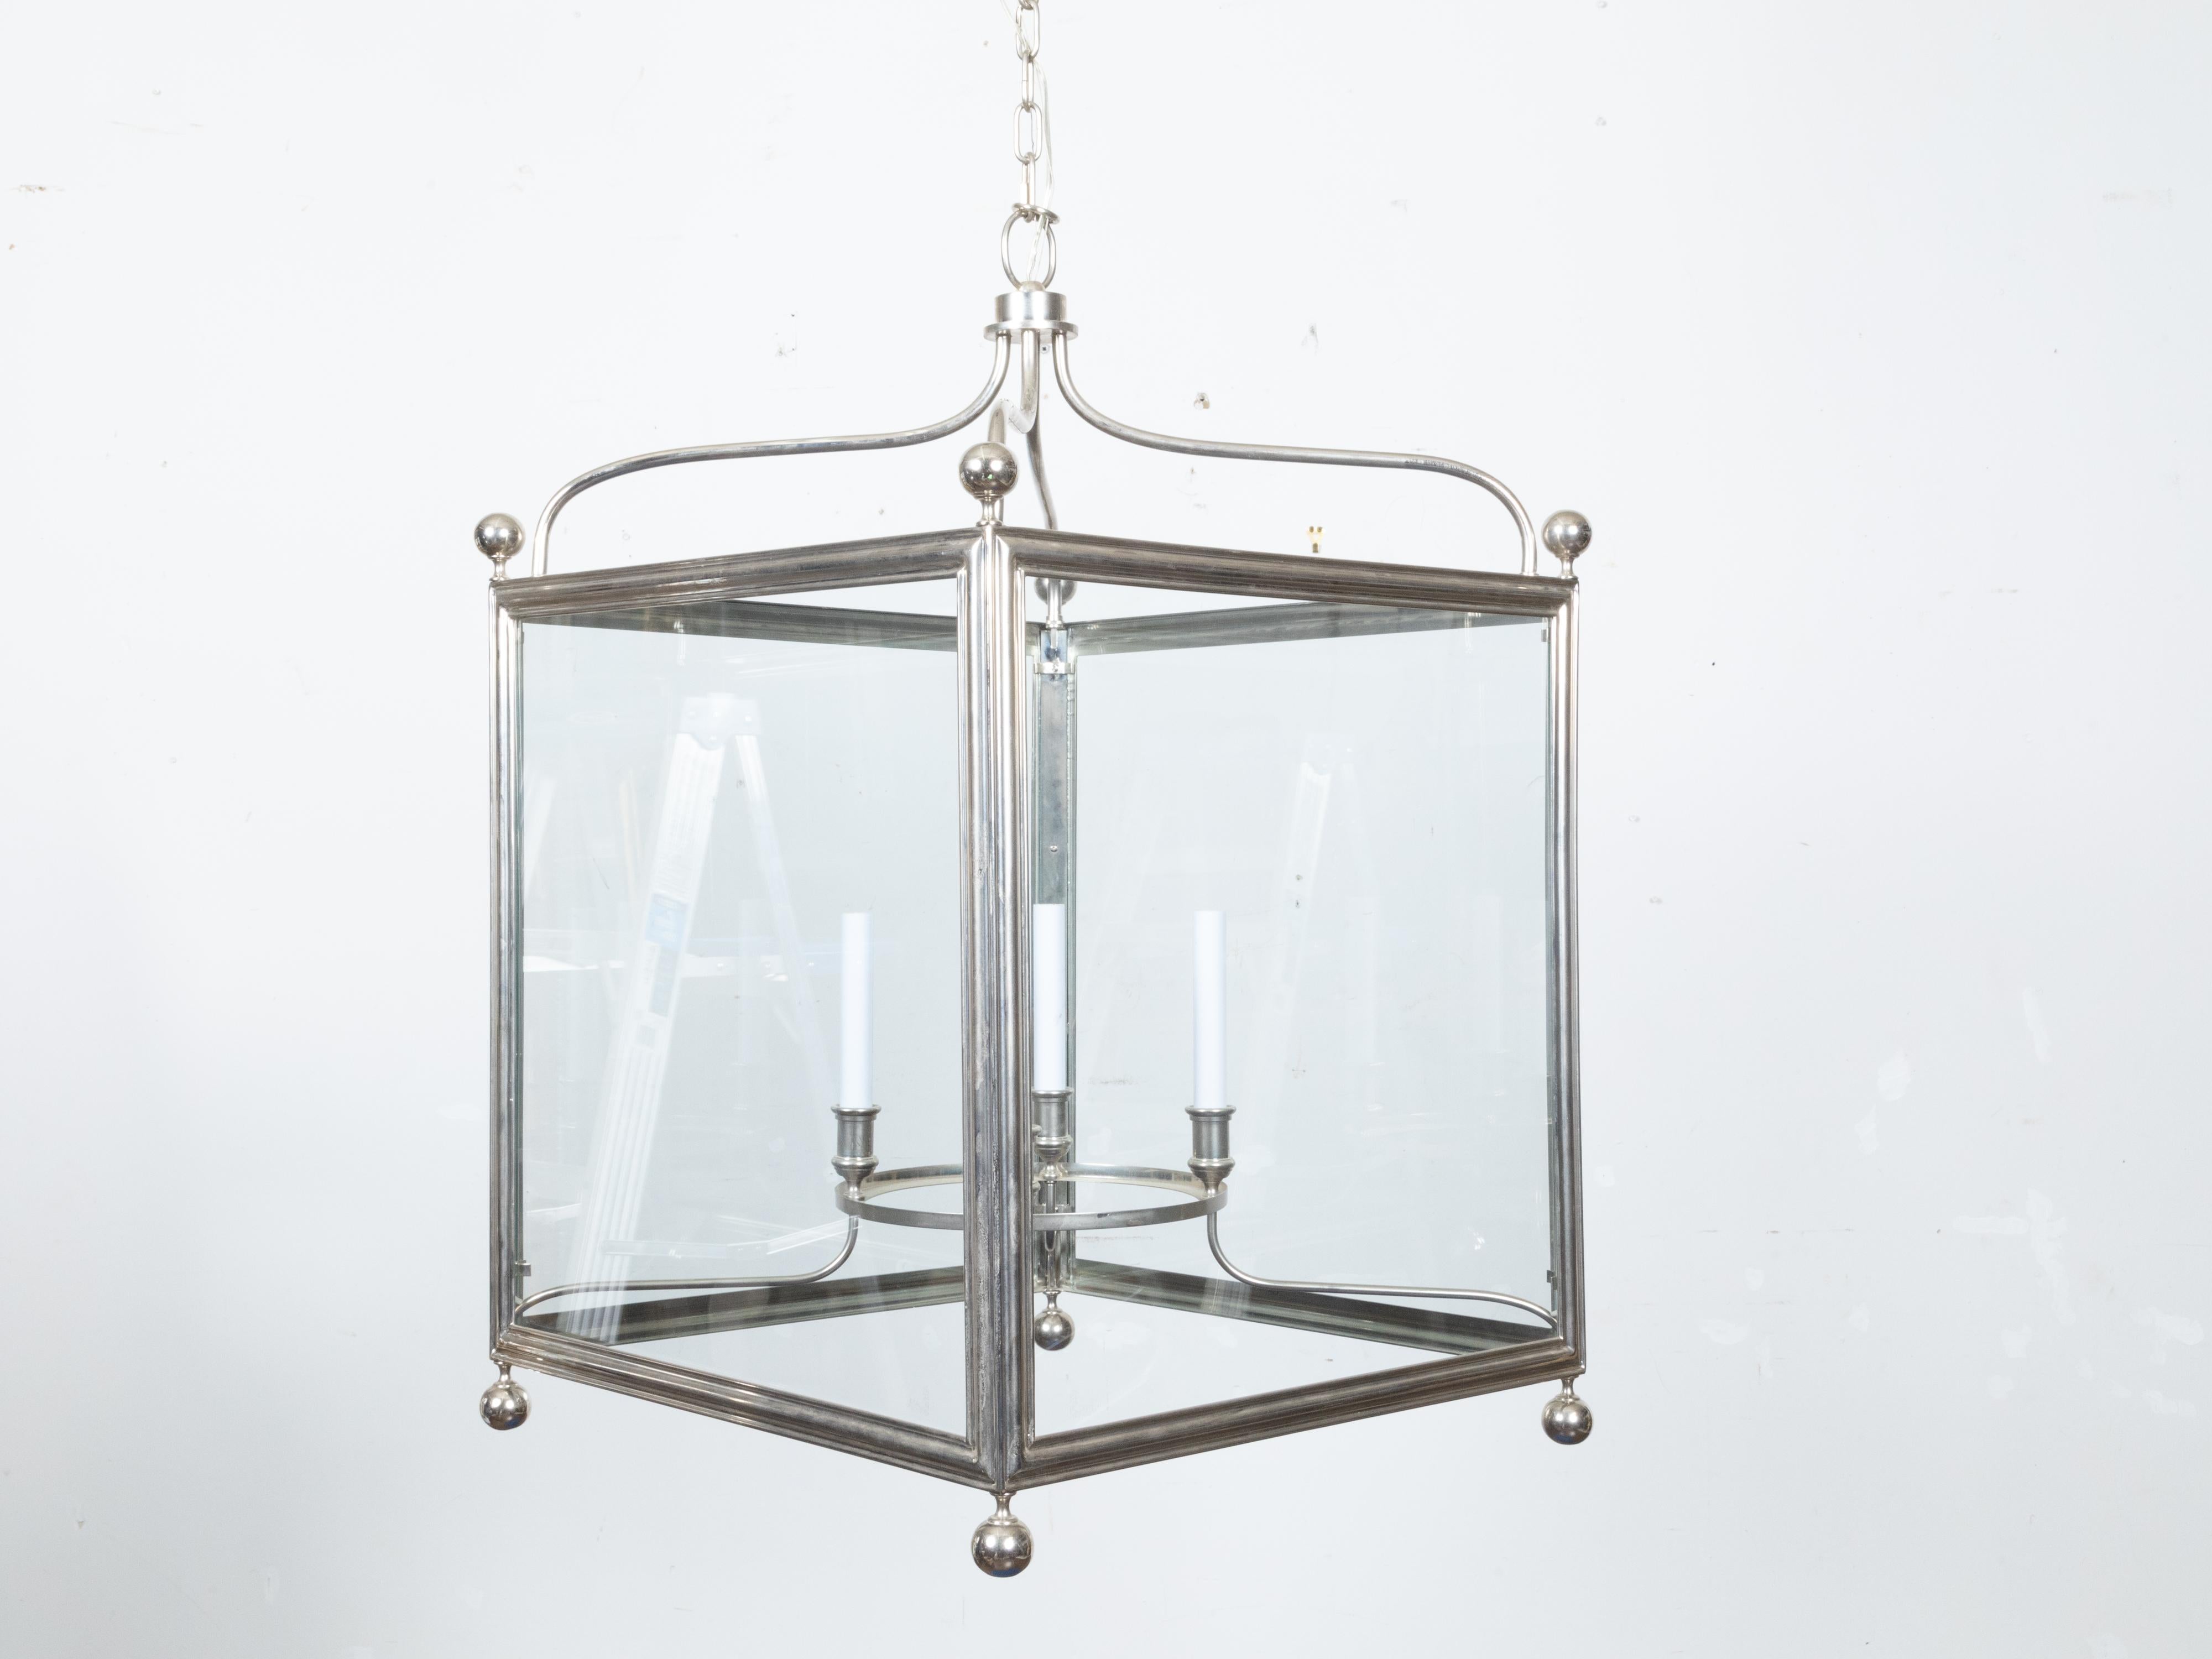 English Midcentury Four-Light Lantern with Silver Color and Petite Spheres For Sale 2